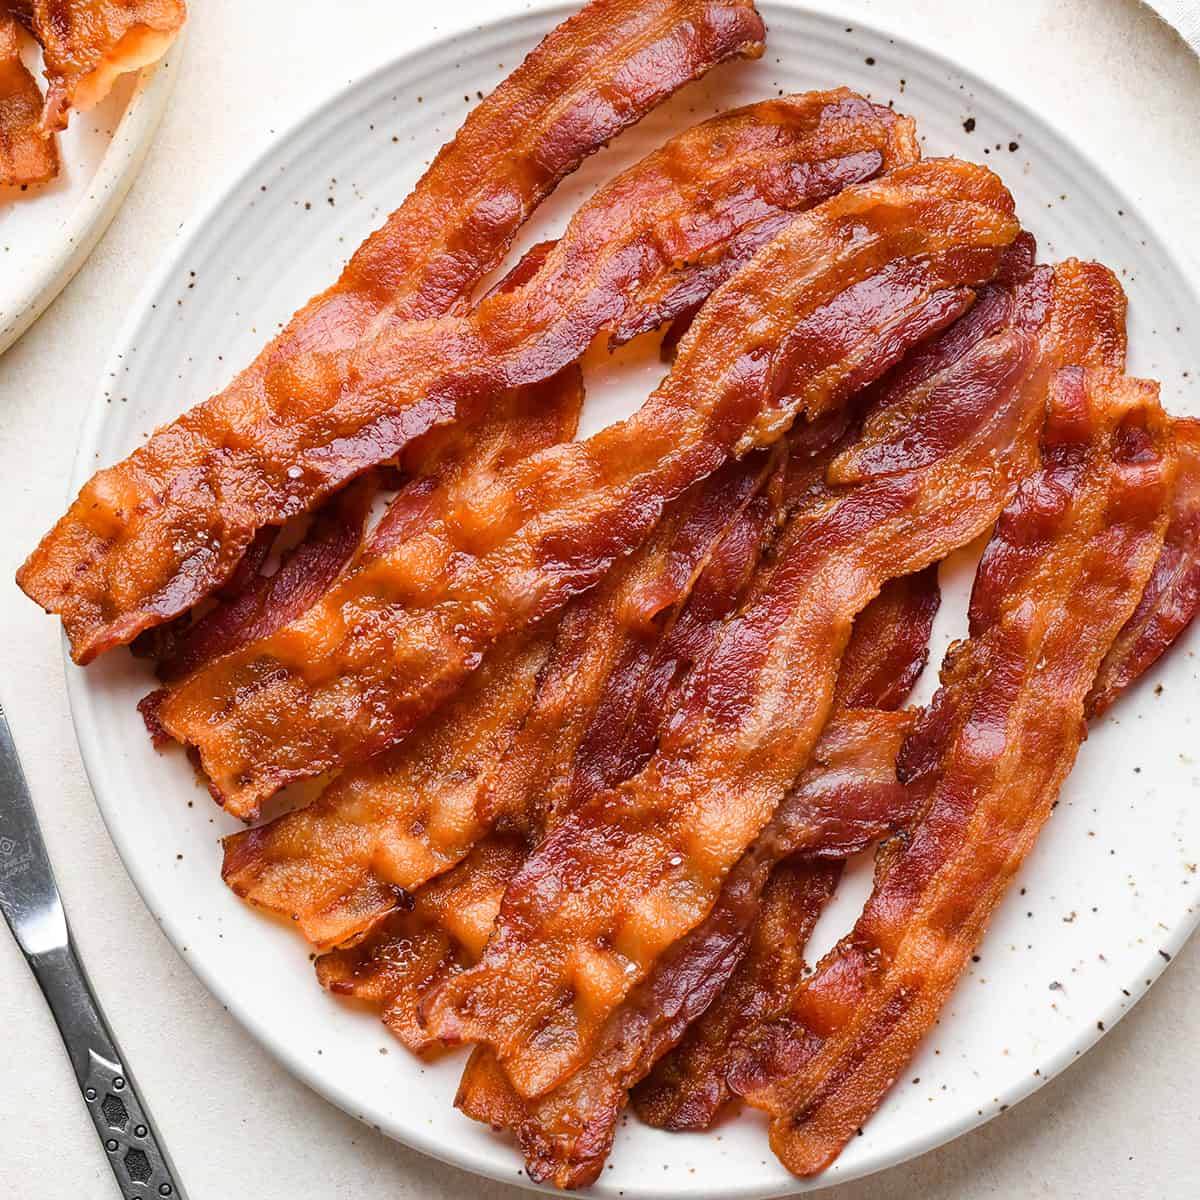 10 slices of Oven Baked Bacon on a plate